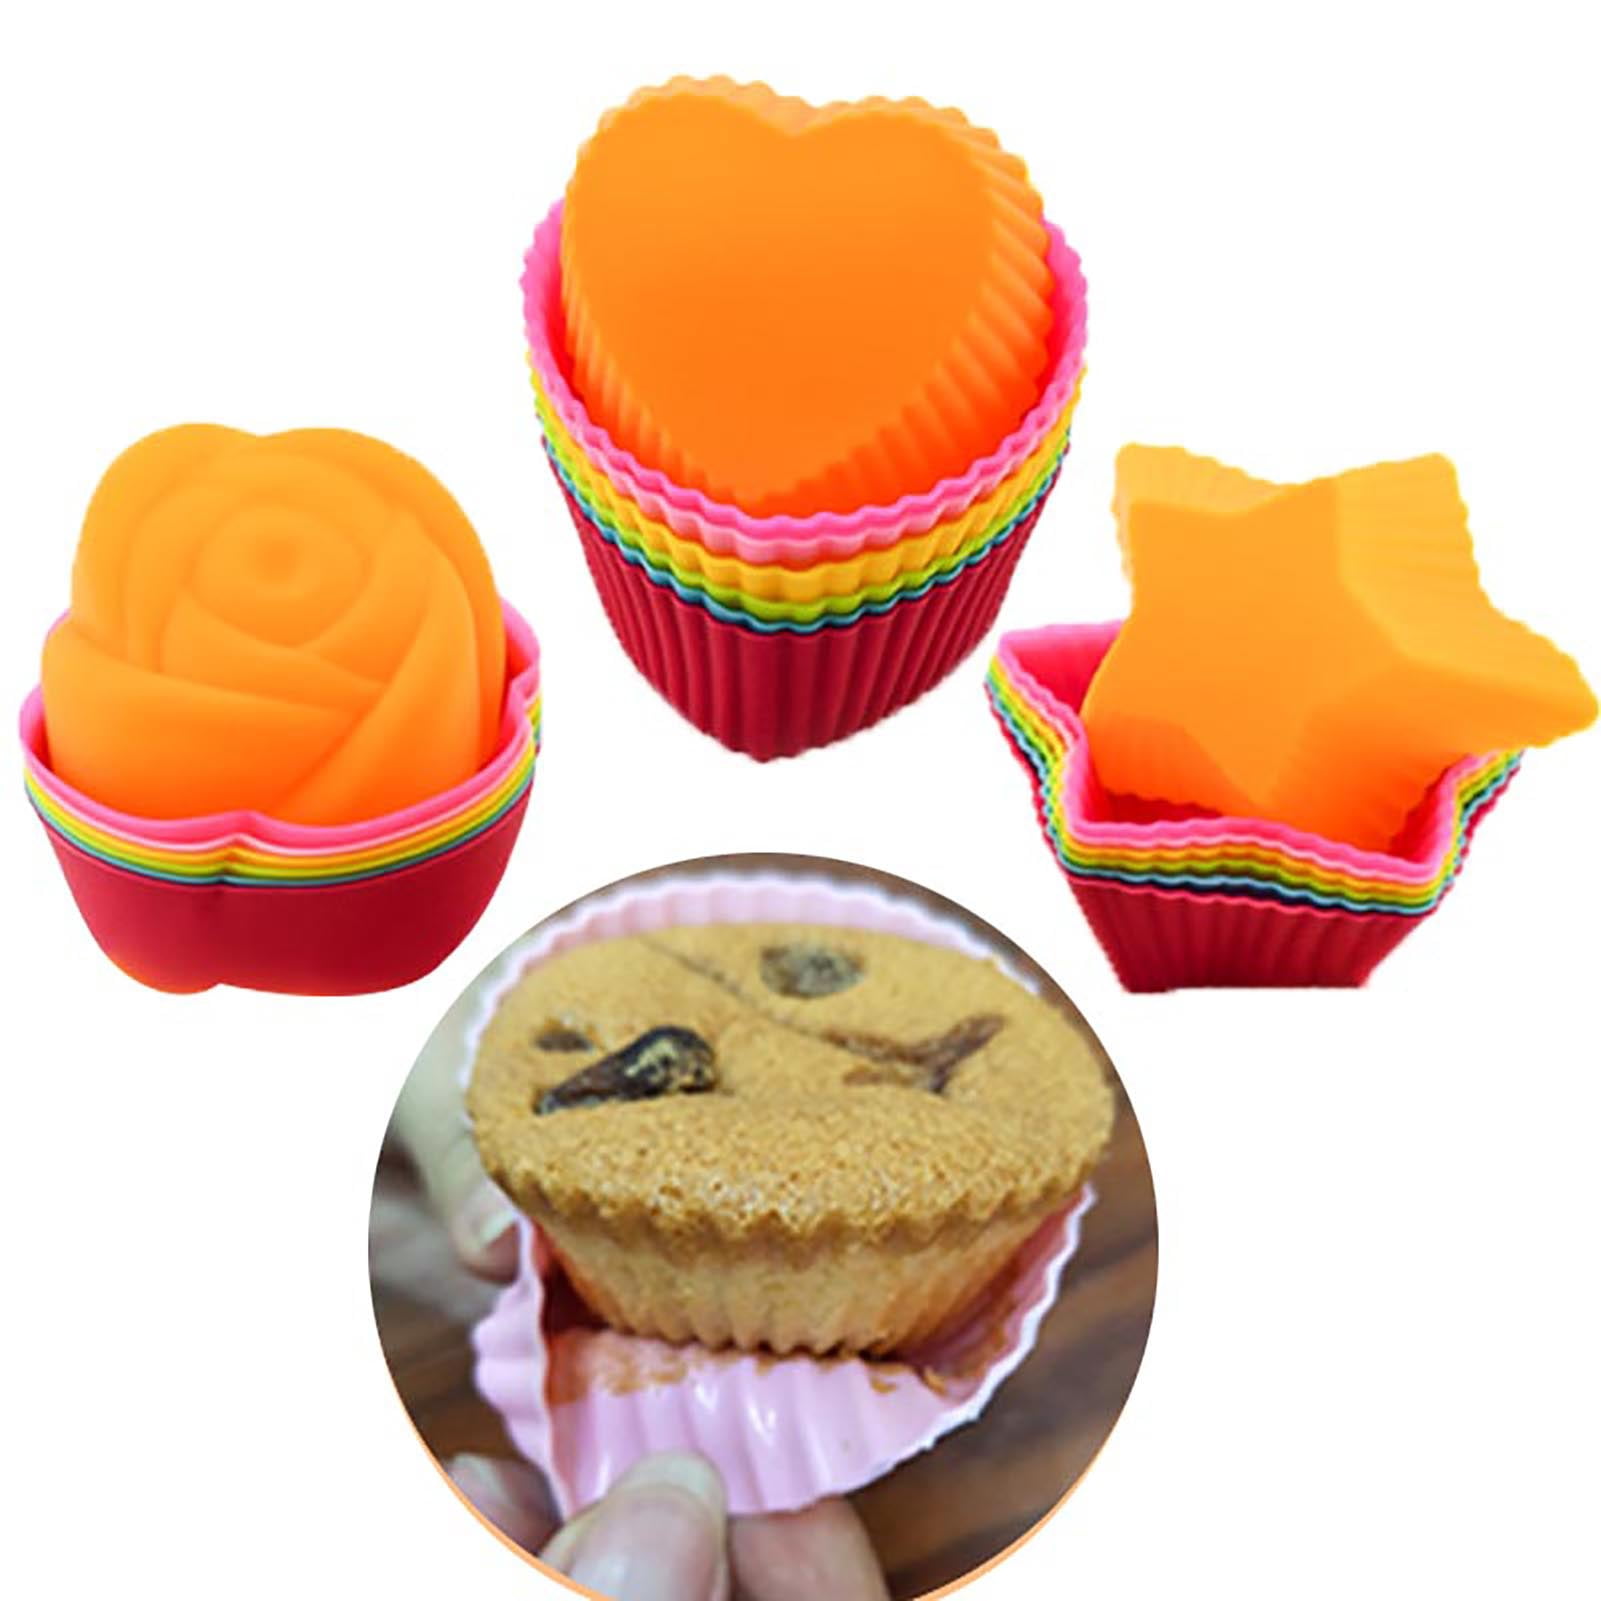 12pcs/lot Silicone Cookie Chocolate Cake Muffin Cupcake Liner Baking Tool Mold